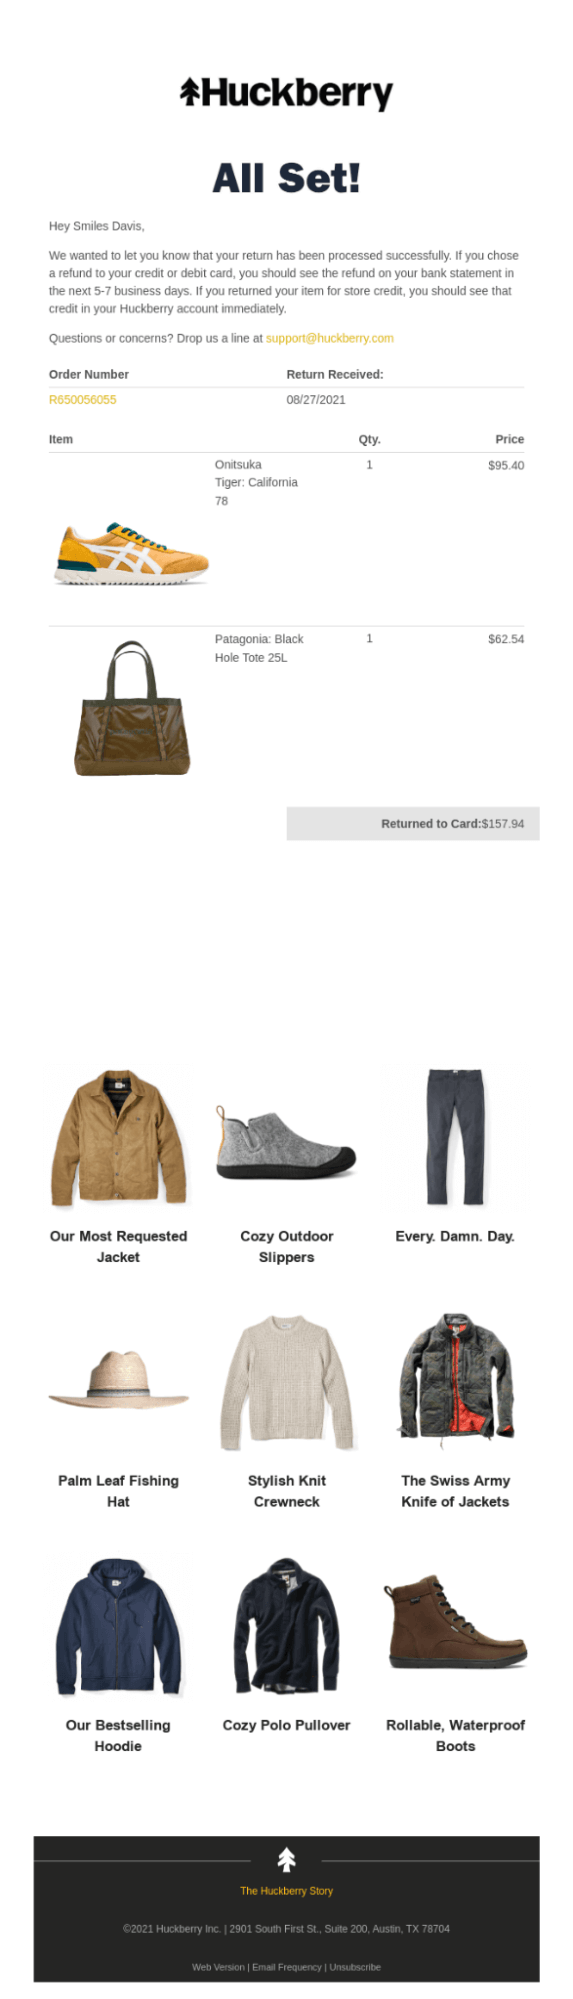  Huckberry Email- Using post-transaction remarketing email